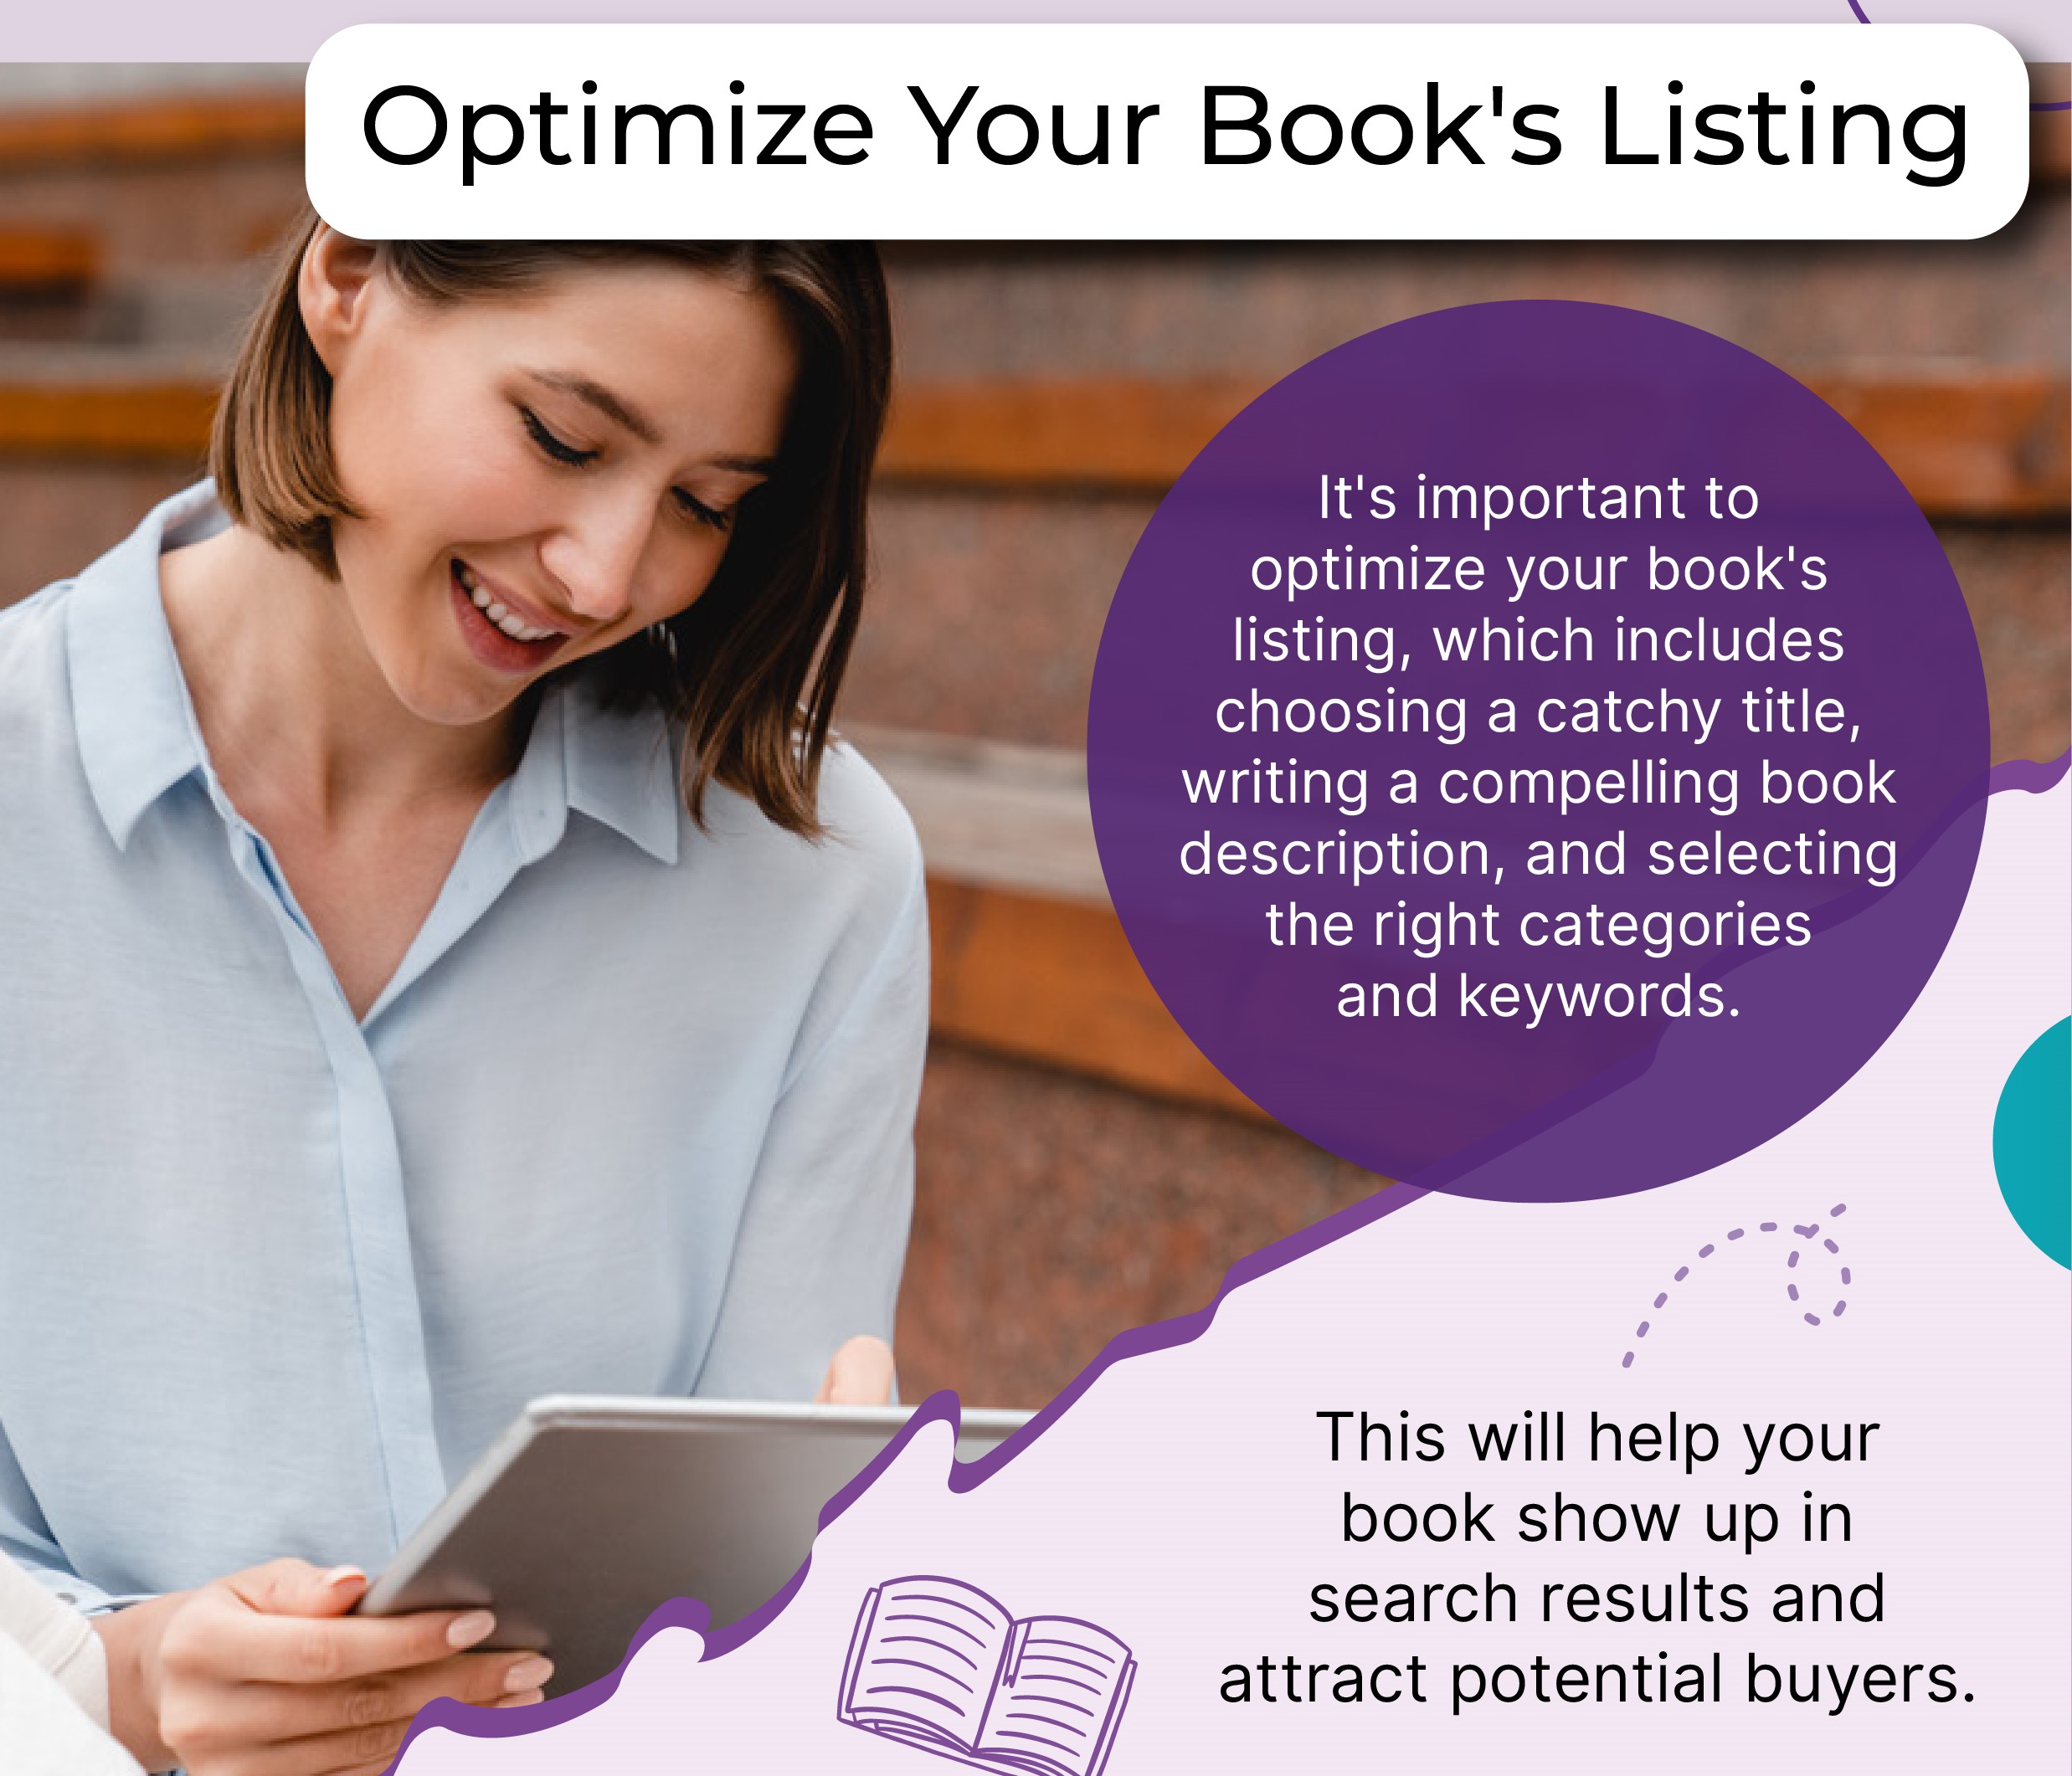 Selling your ebook online can be a great way to reach a wider audience and make money from your writing.